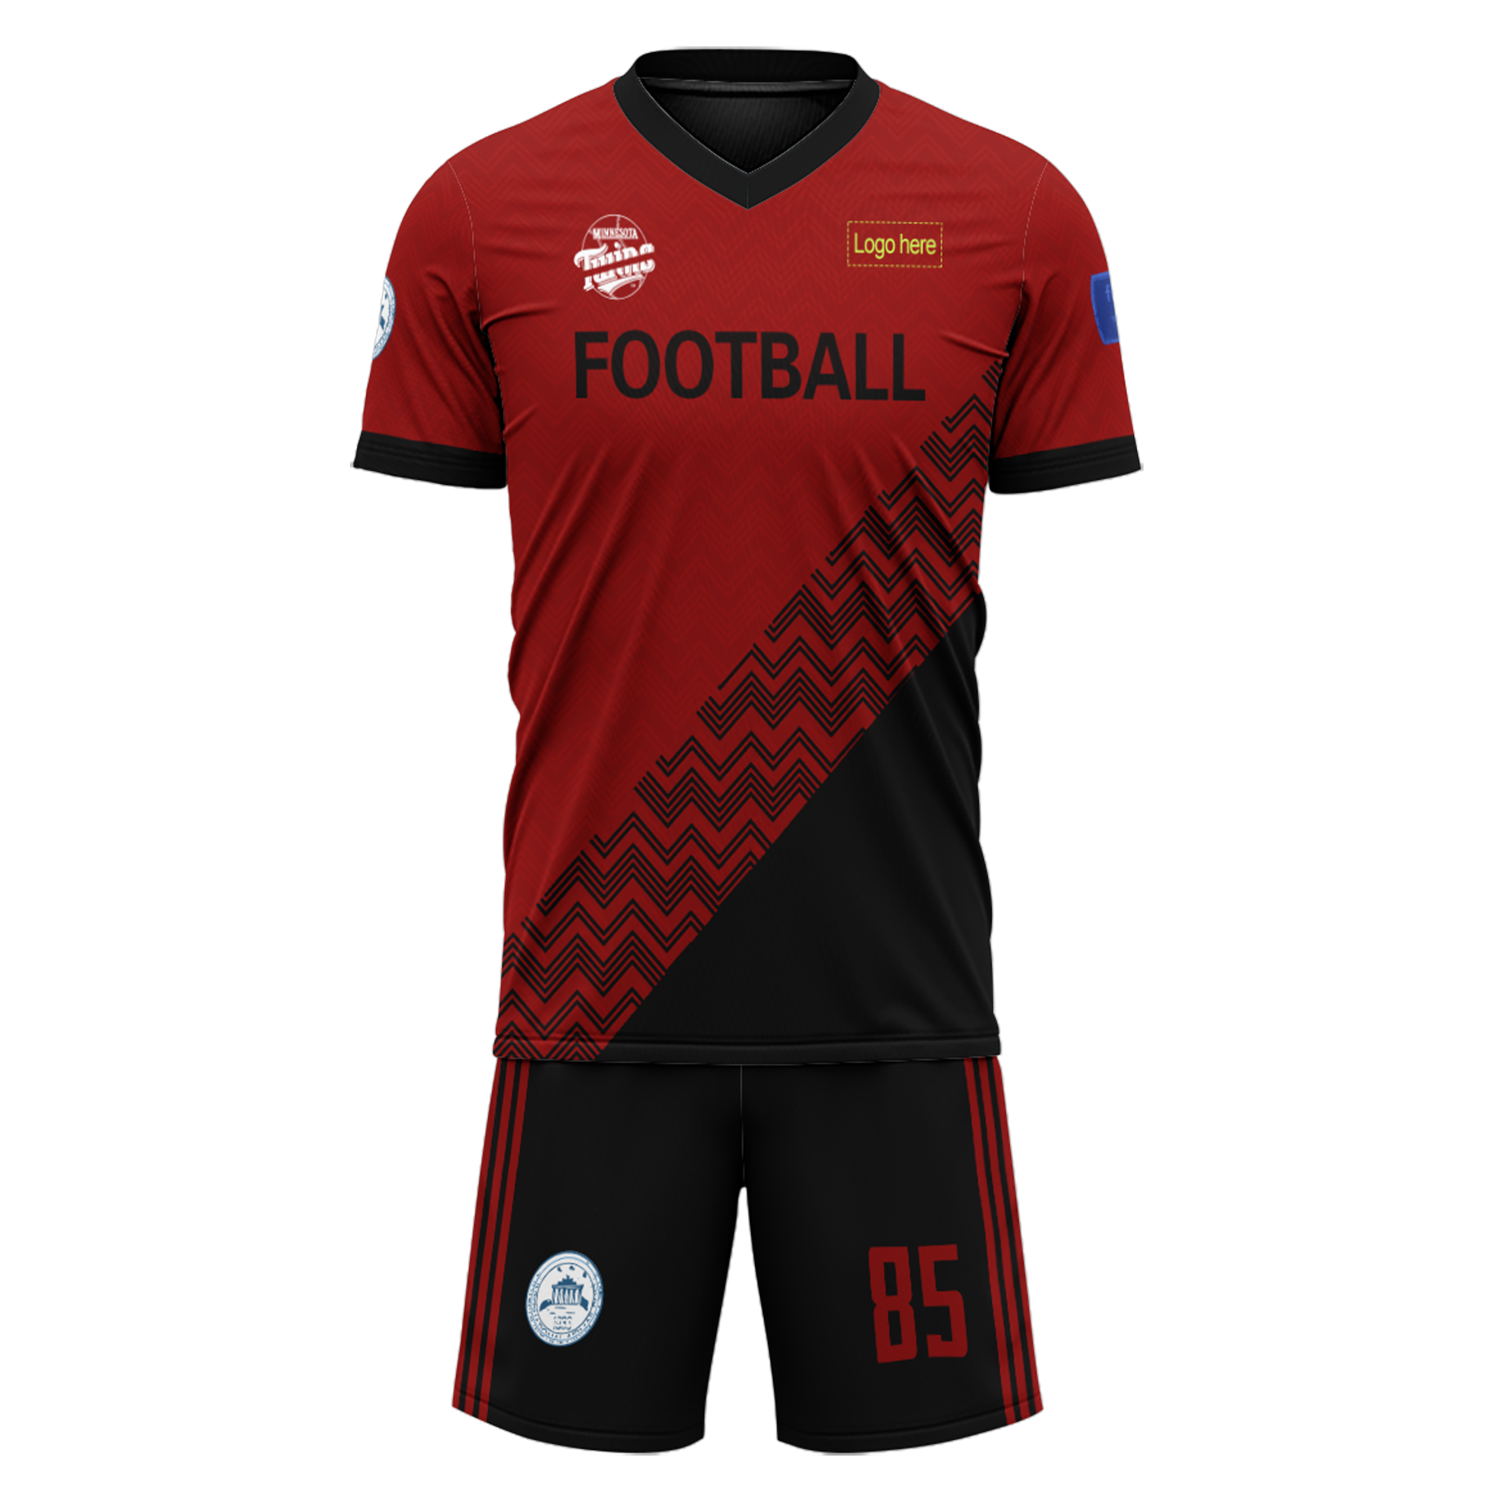 Custom Morocco Team Football Suits Personalized Design Print on Demand Soccer Jerseys